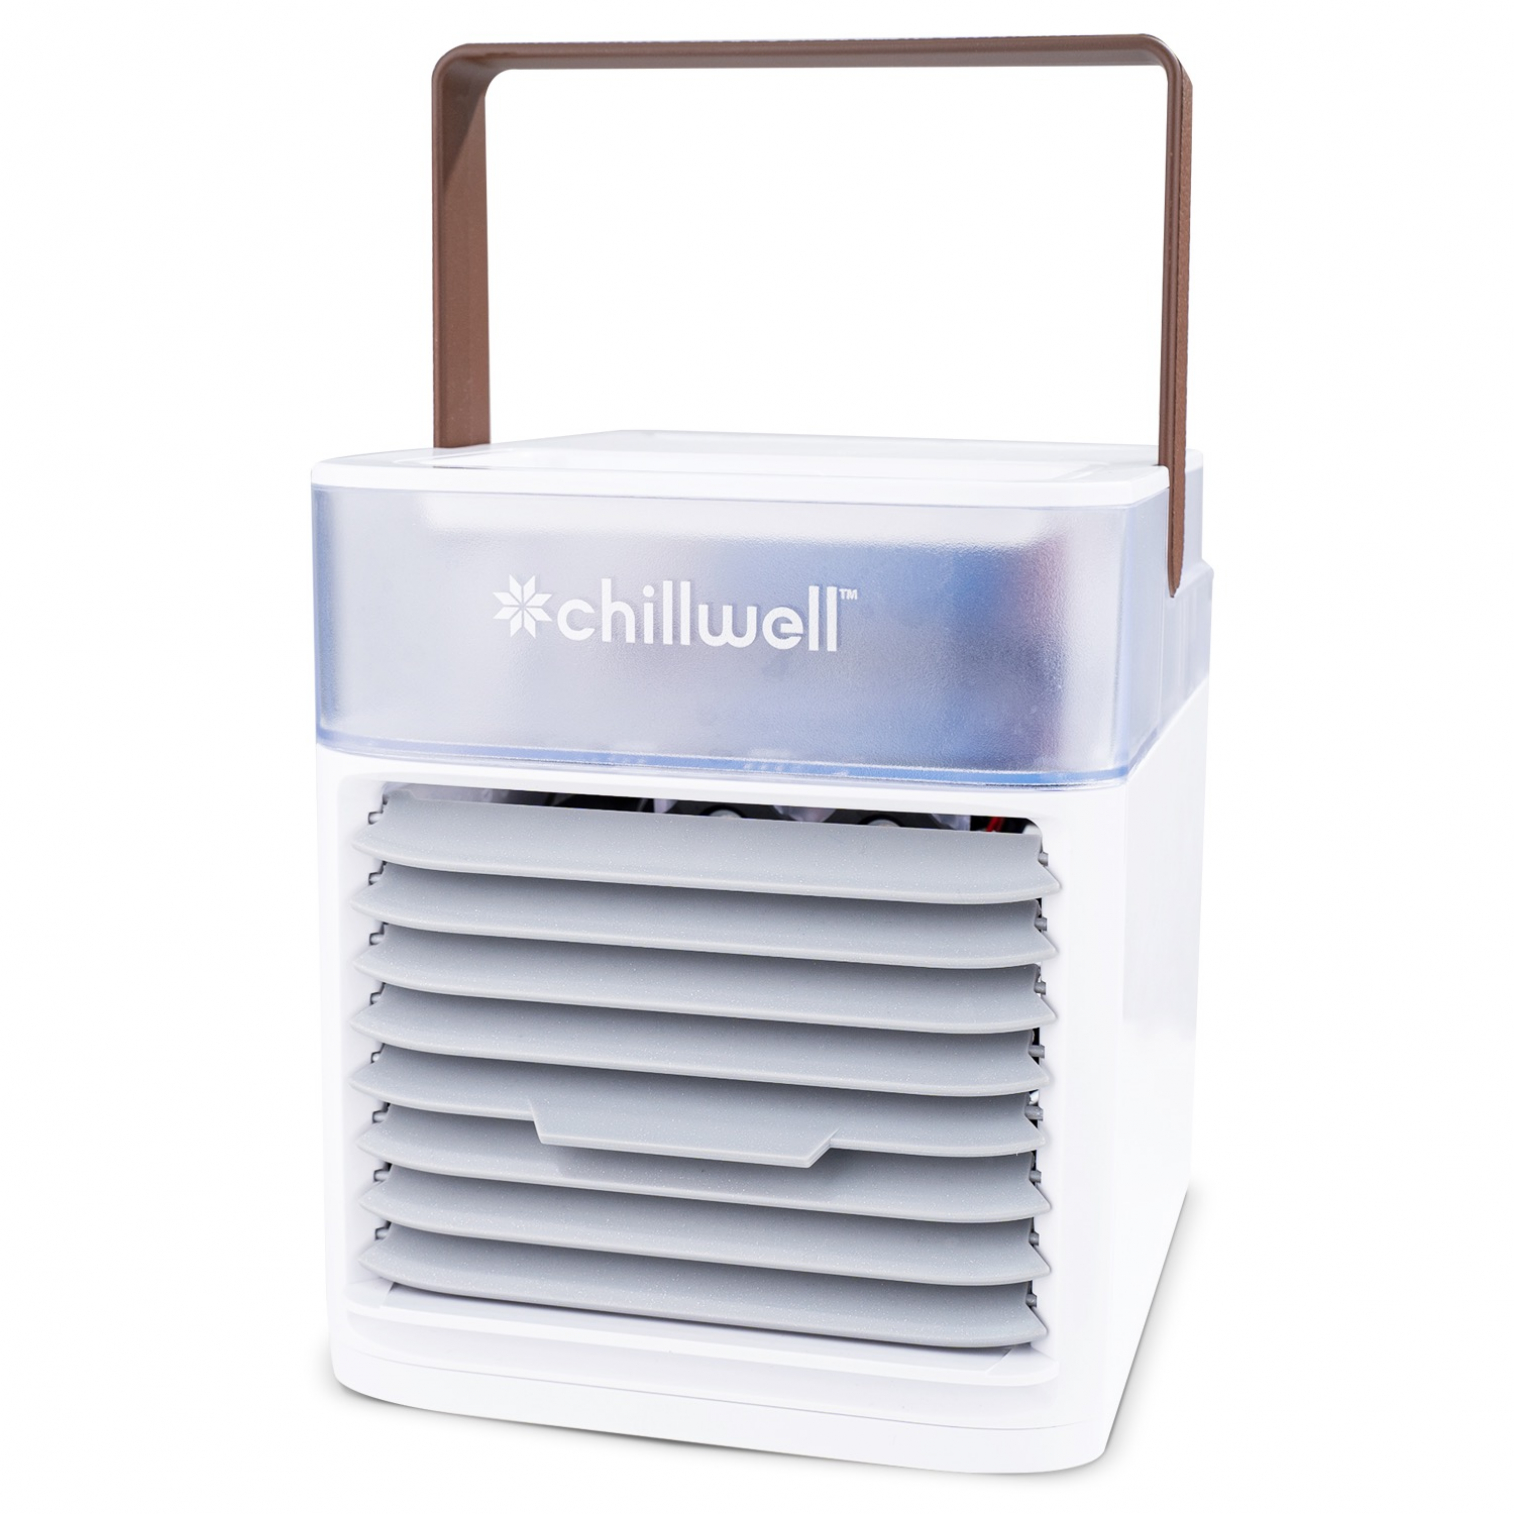 Chillwell AC Air Coolers